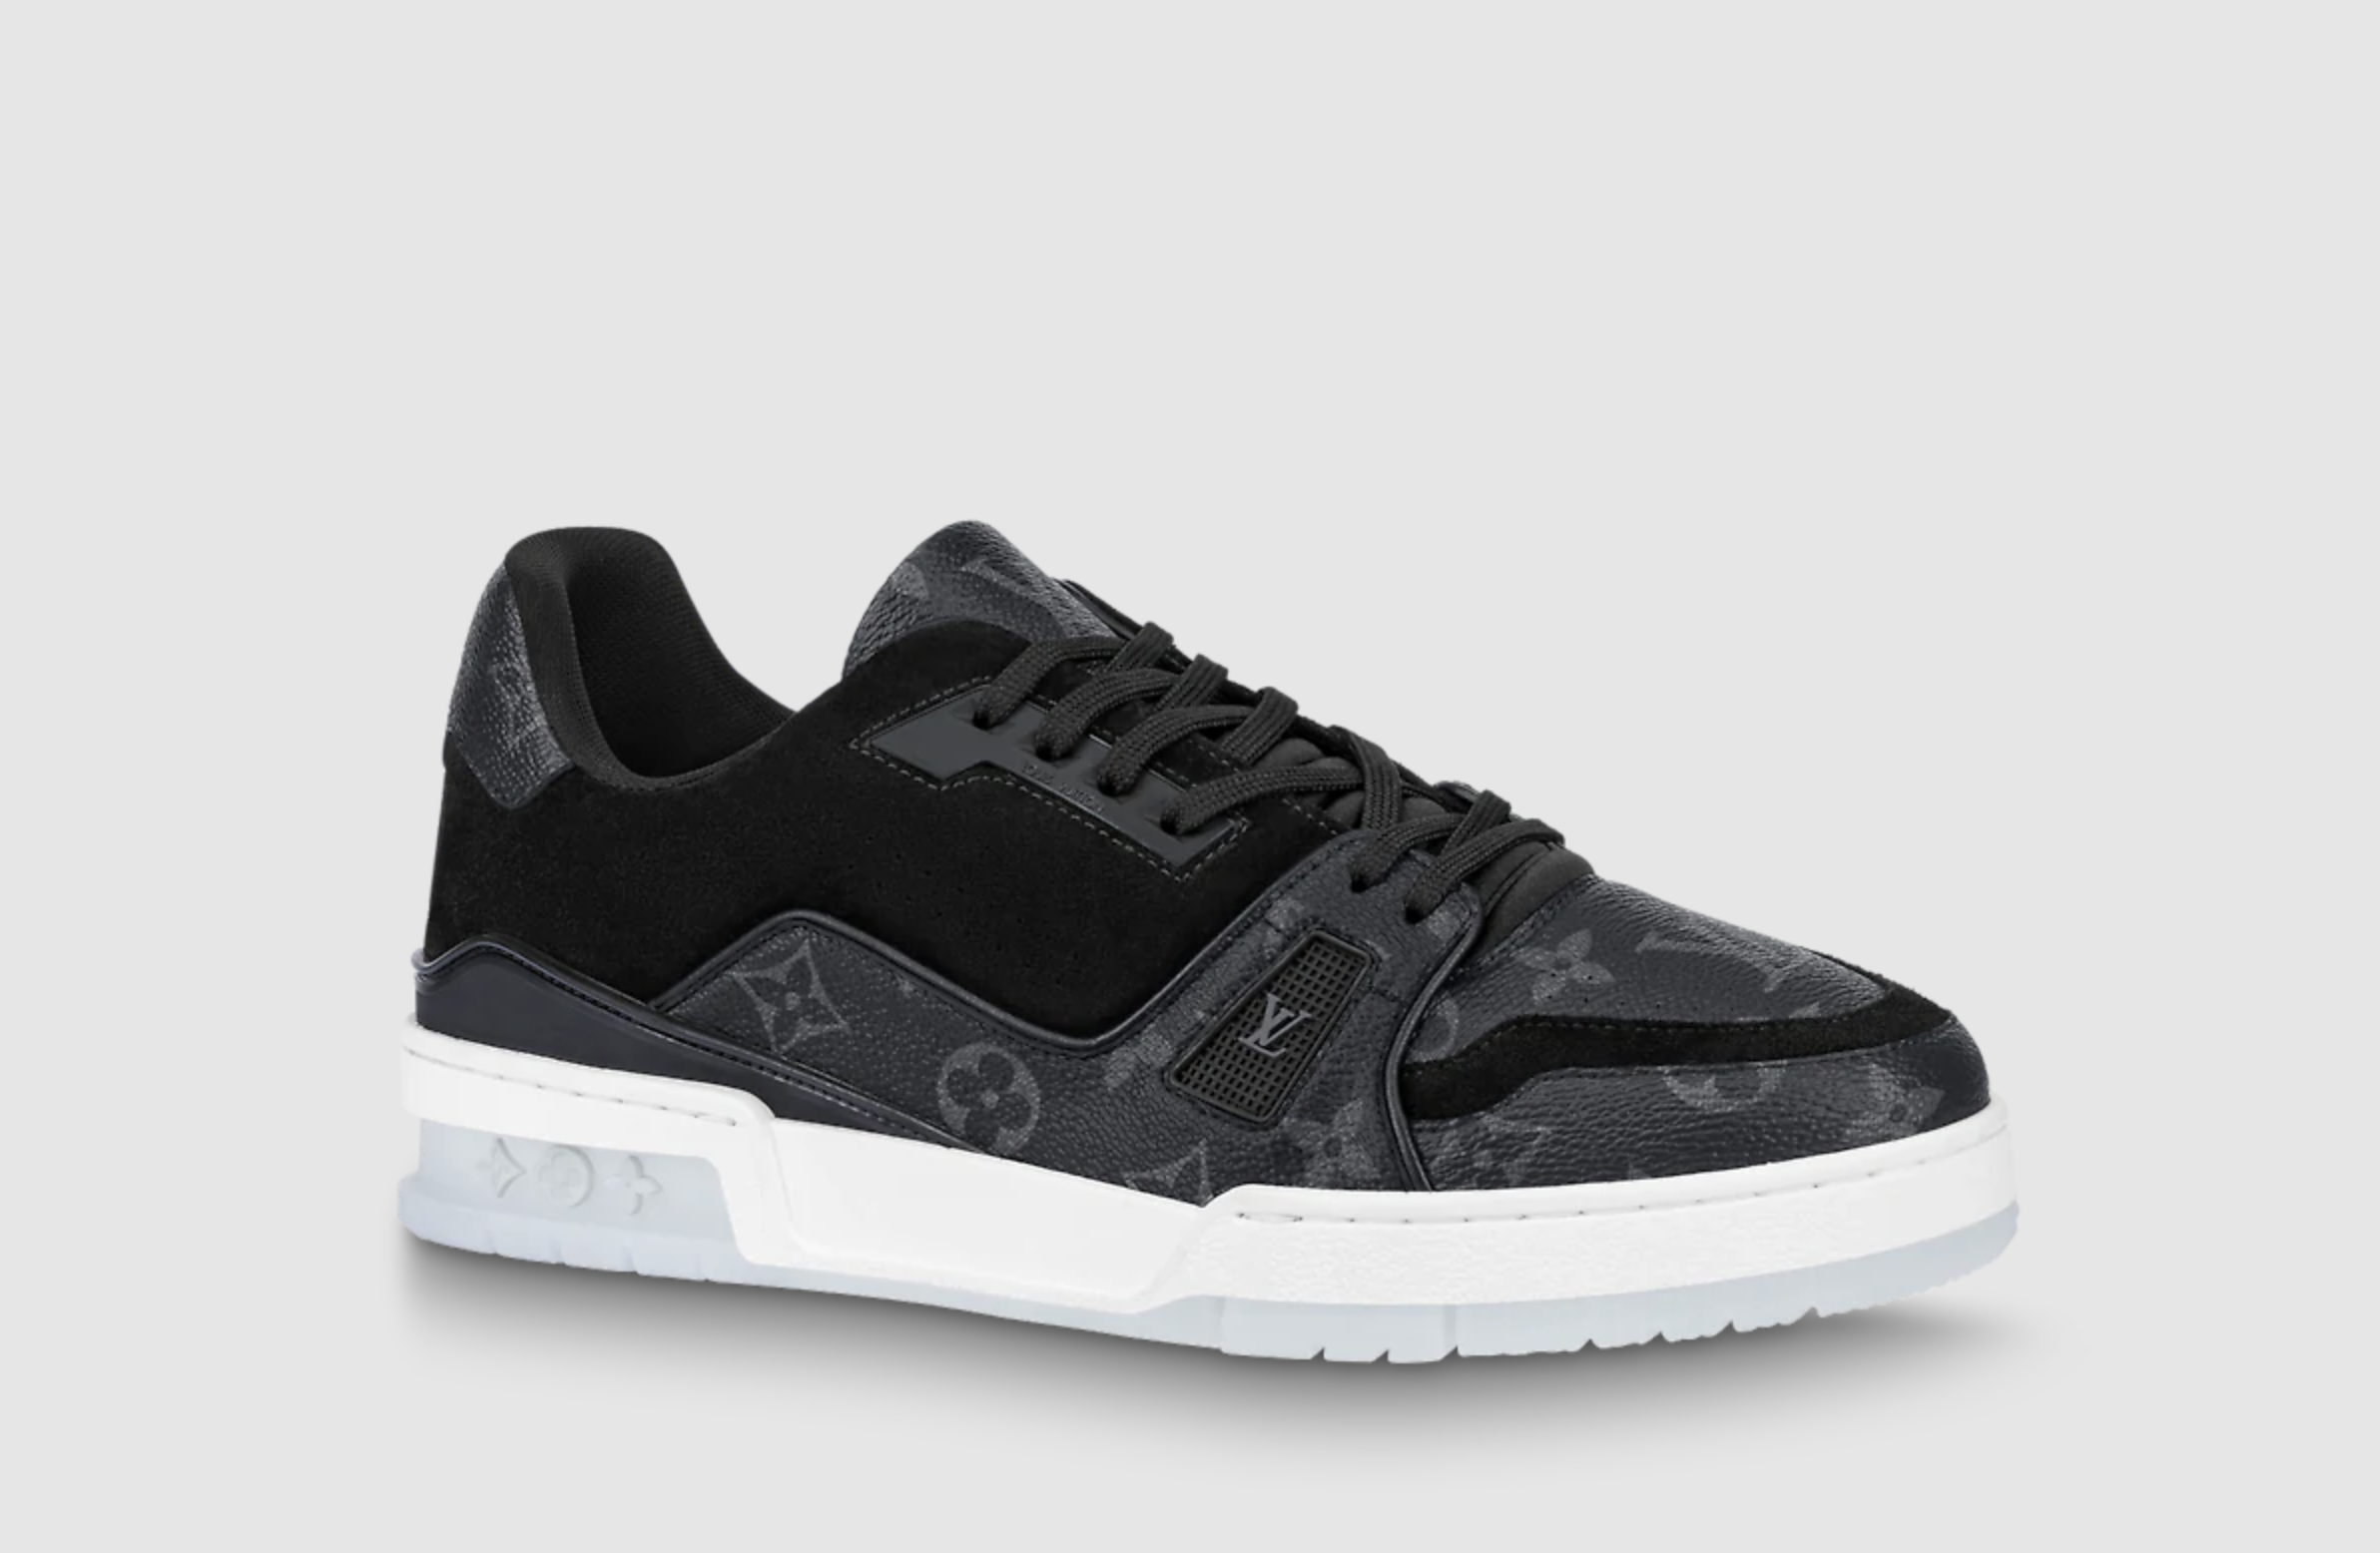 louis vuitton hits the hardwood with the lv trainer - louis